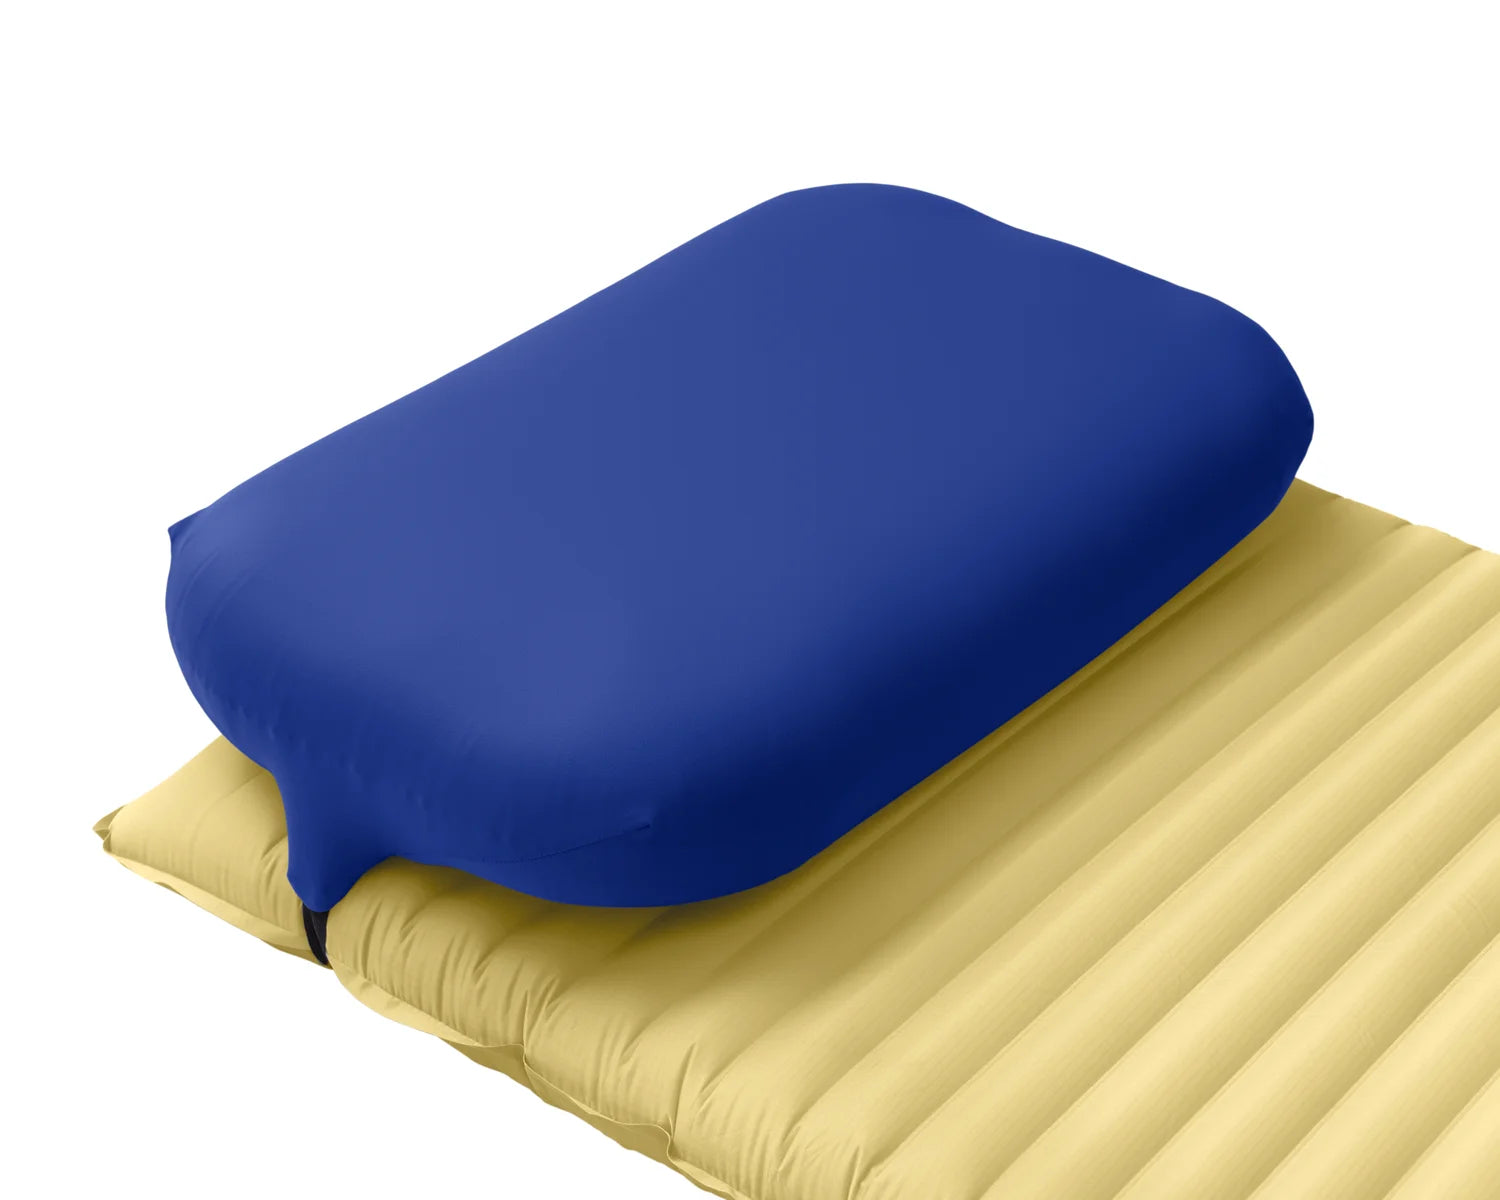 Pillow Strap large in blue side view. Backpacking pillowcase for attaching to a sleeping pad for better sleep camping.